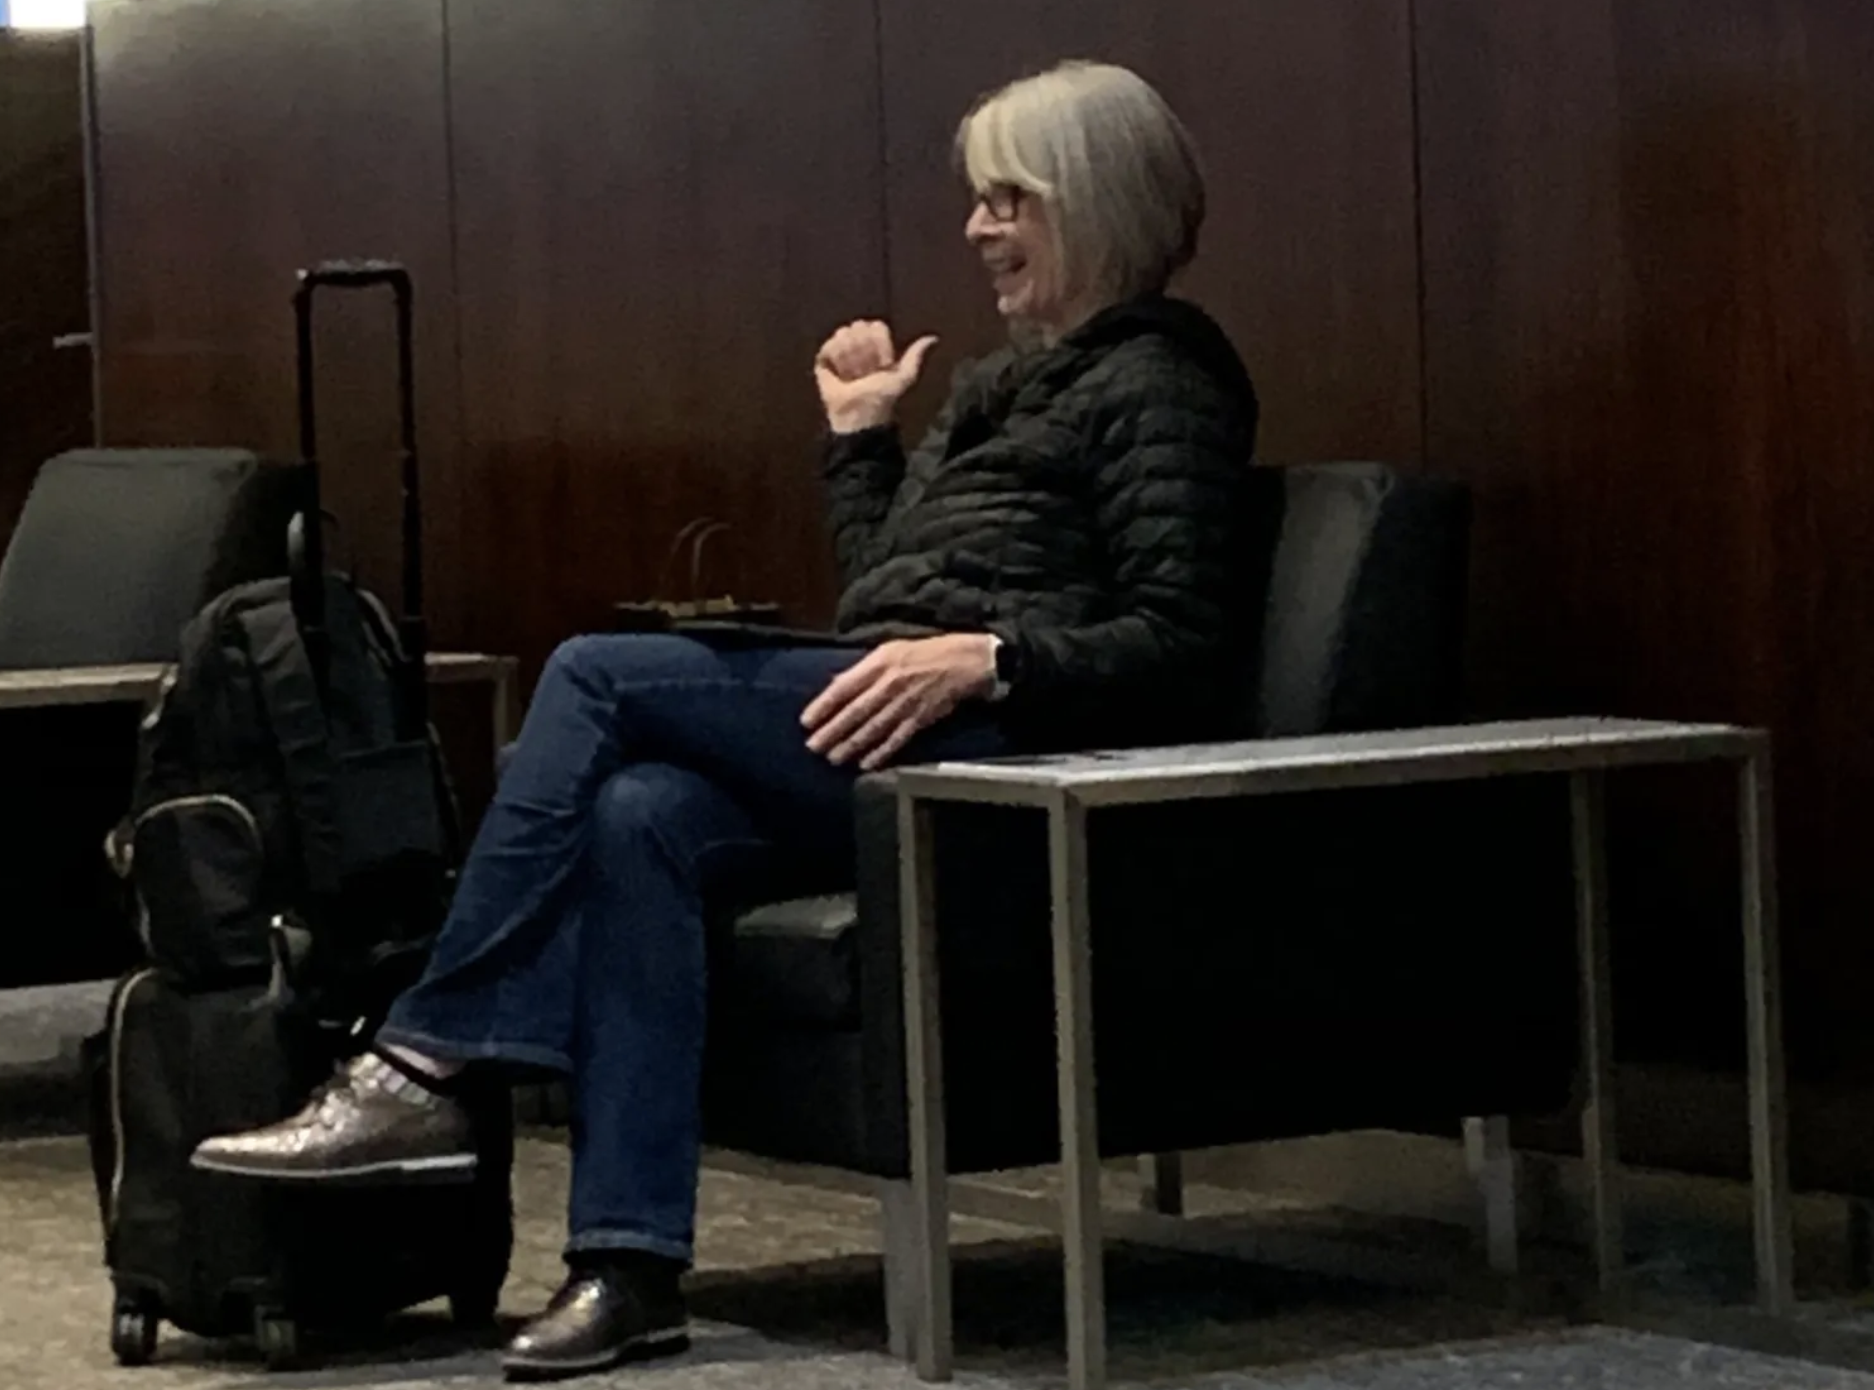 Liberal Health Minister Patty Hajdu sitting at an airport lounge not wearing a mask.